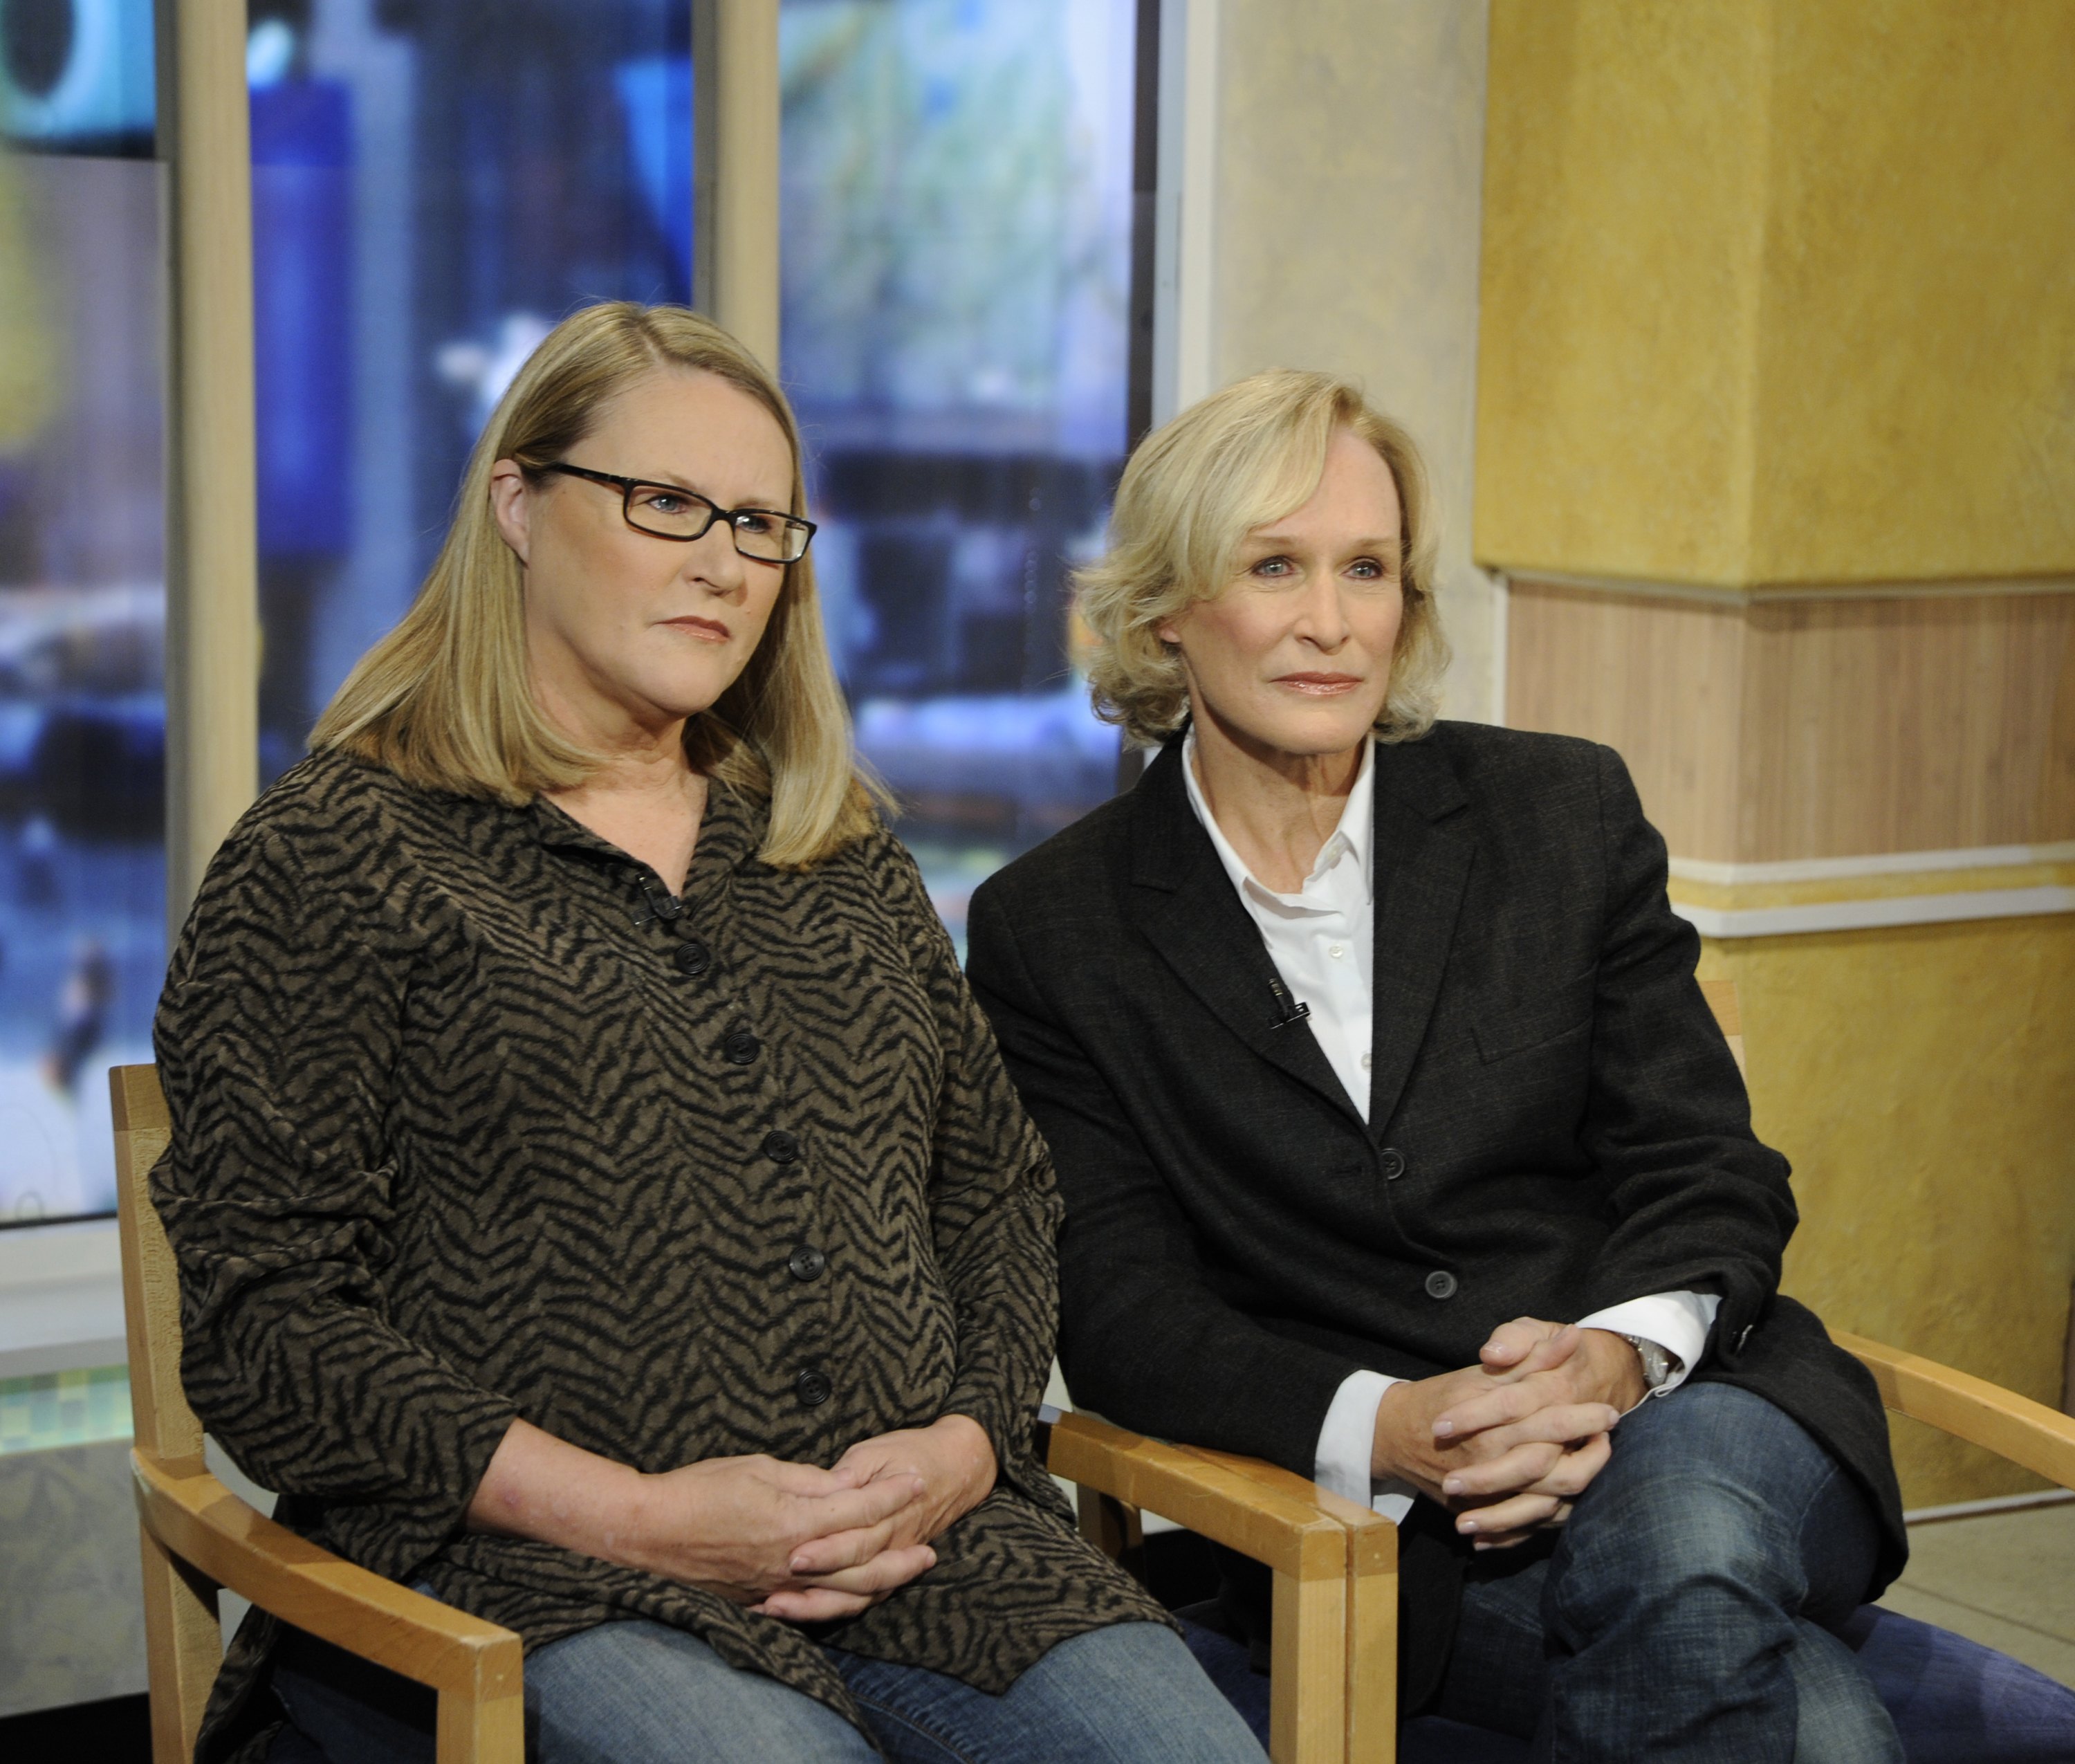 Glenn Close and Jessie Close on “Good Morning America” on October 21, 2009 | Source: Getty Images